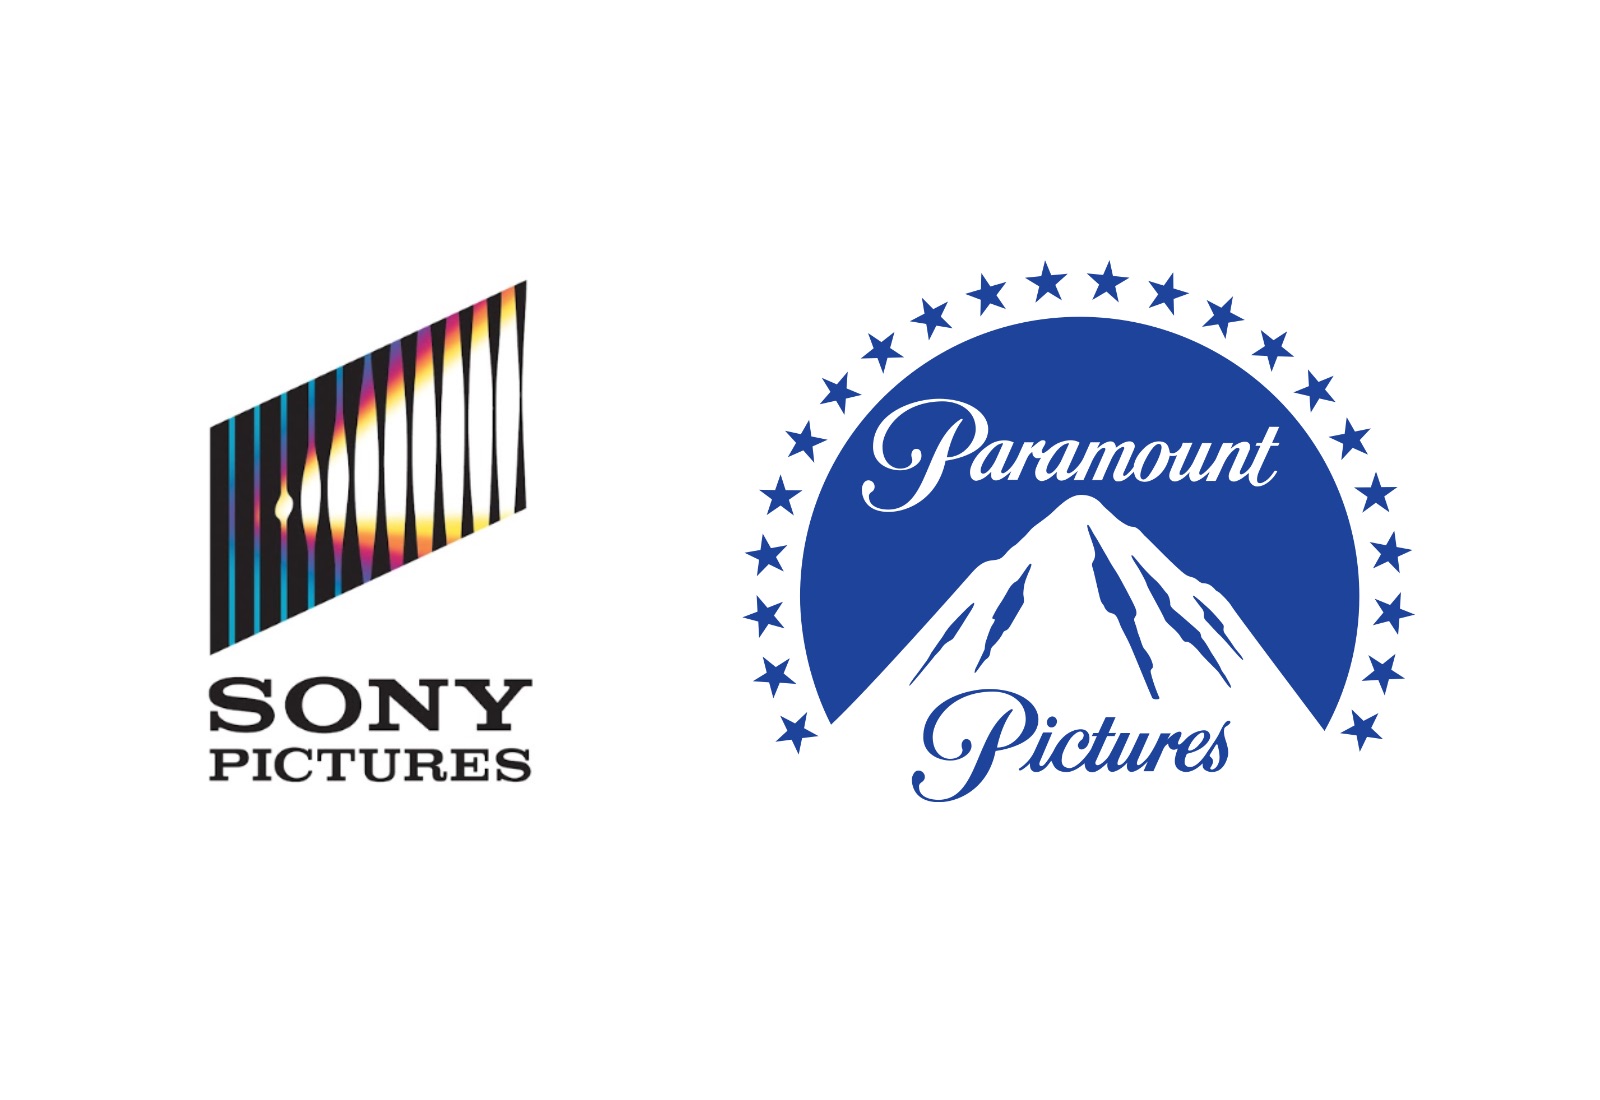 Sony Paramount Pictures